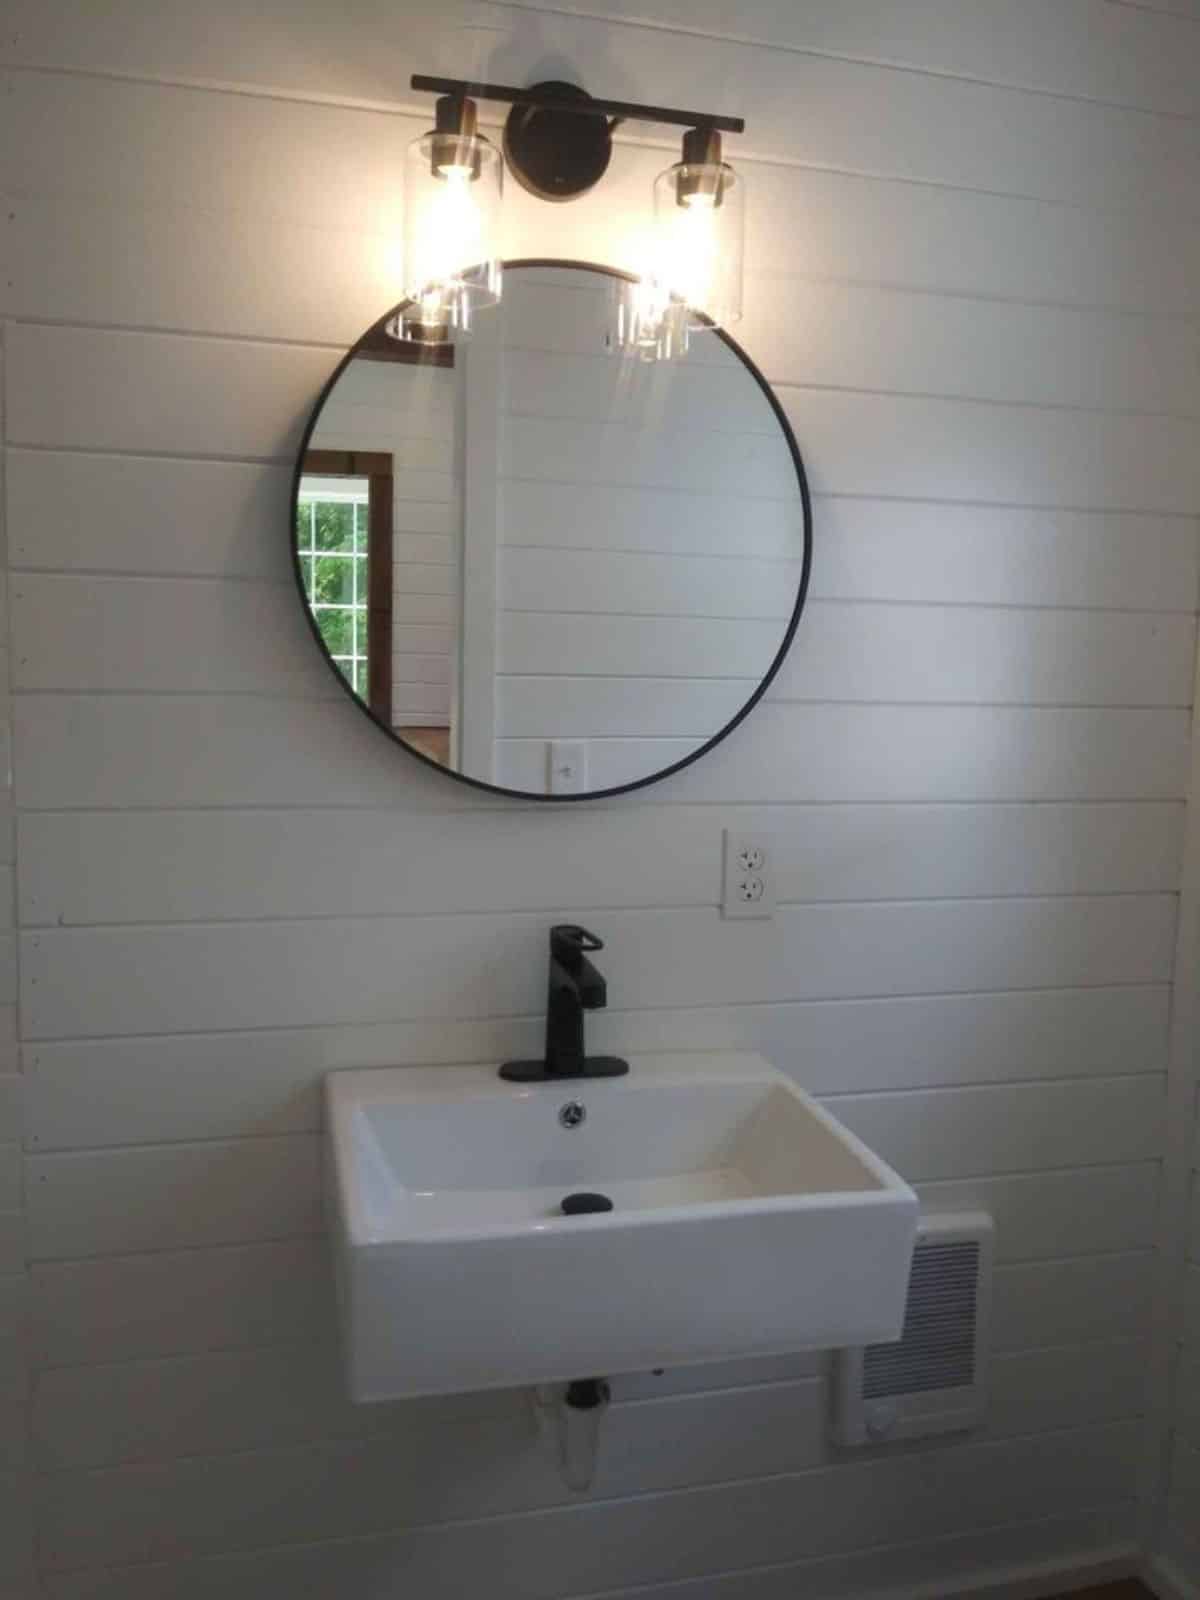 sink with mirror in bathroom of 20’ cottage tiny house